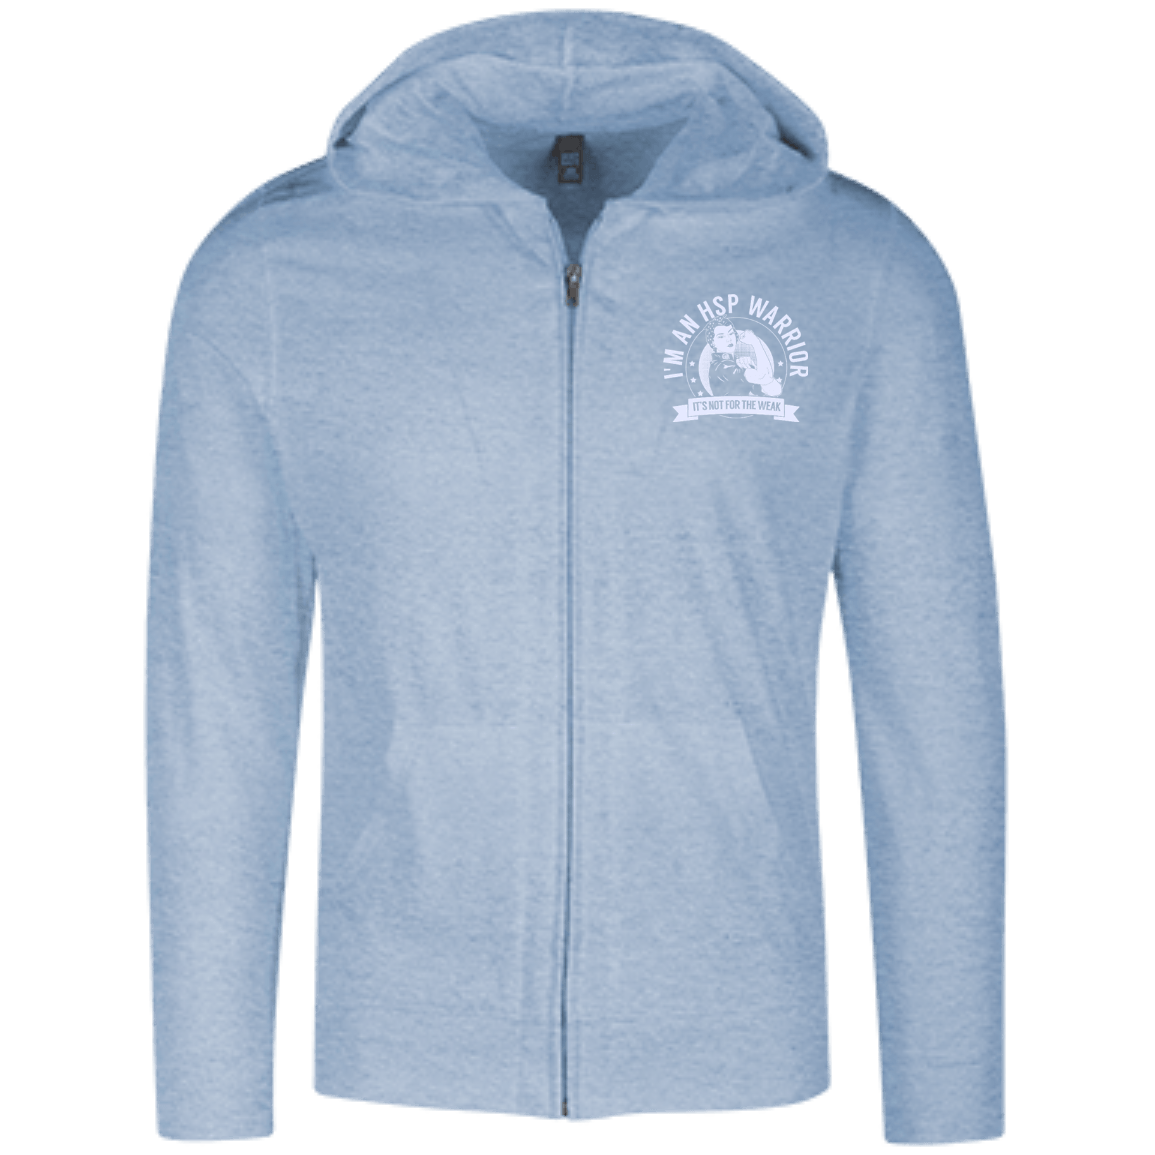 Hereditary Spastic Paraparesis - HSP Warrior Not For The Weak Full Zip Hoodie - The Unchargeables